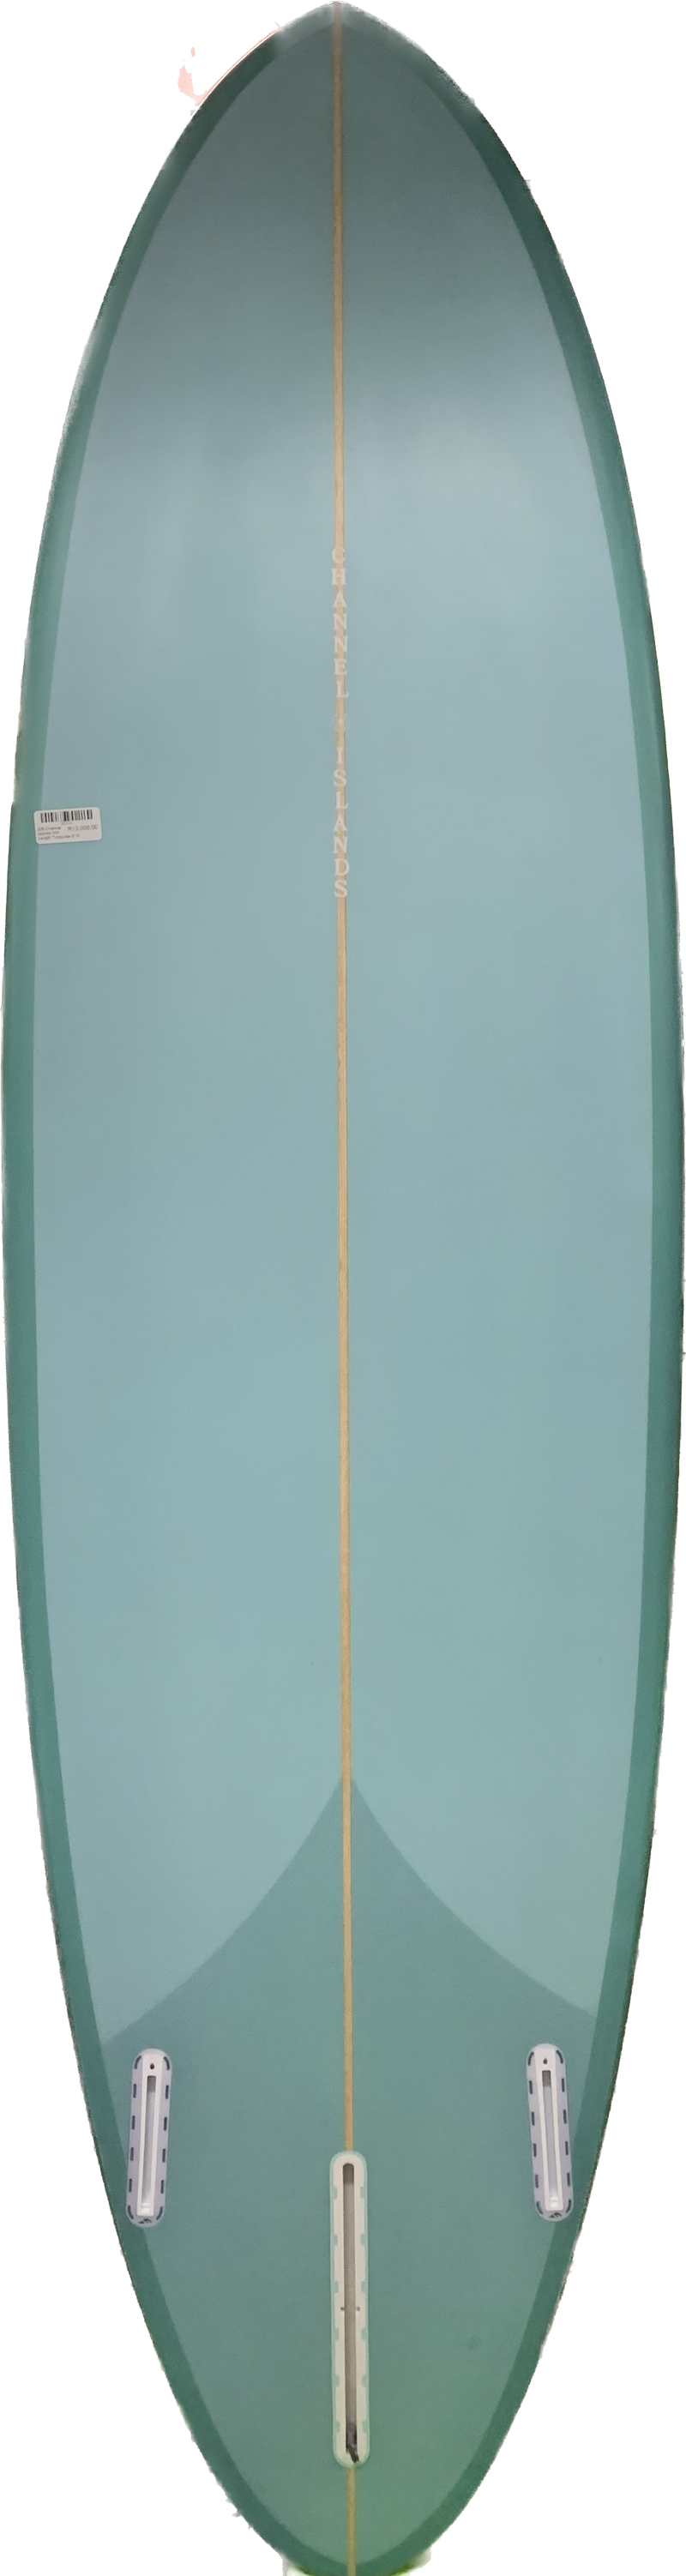 Channel Islands Surfboard Mid Length Turquoise 6'10